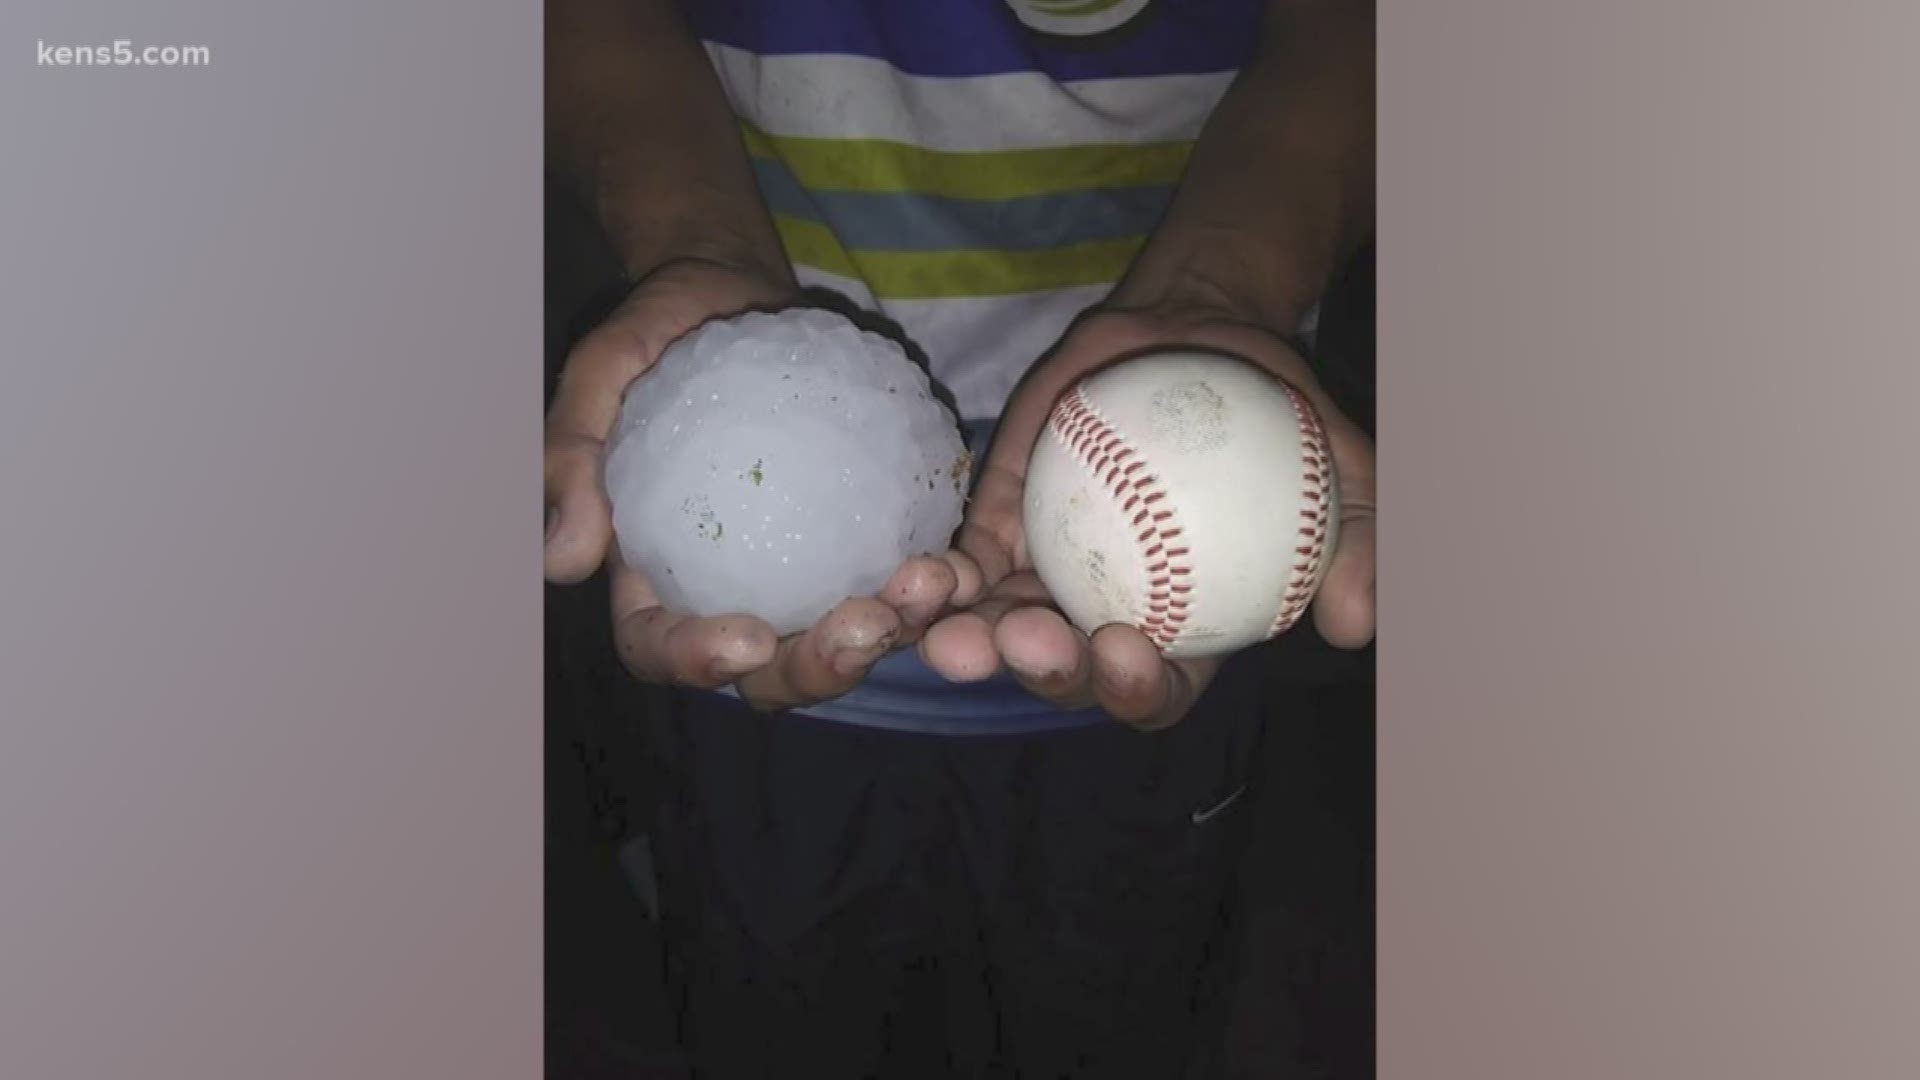 We're taking a look at just how serious the hail was in Del Rio, Texas.